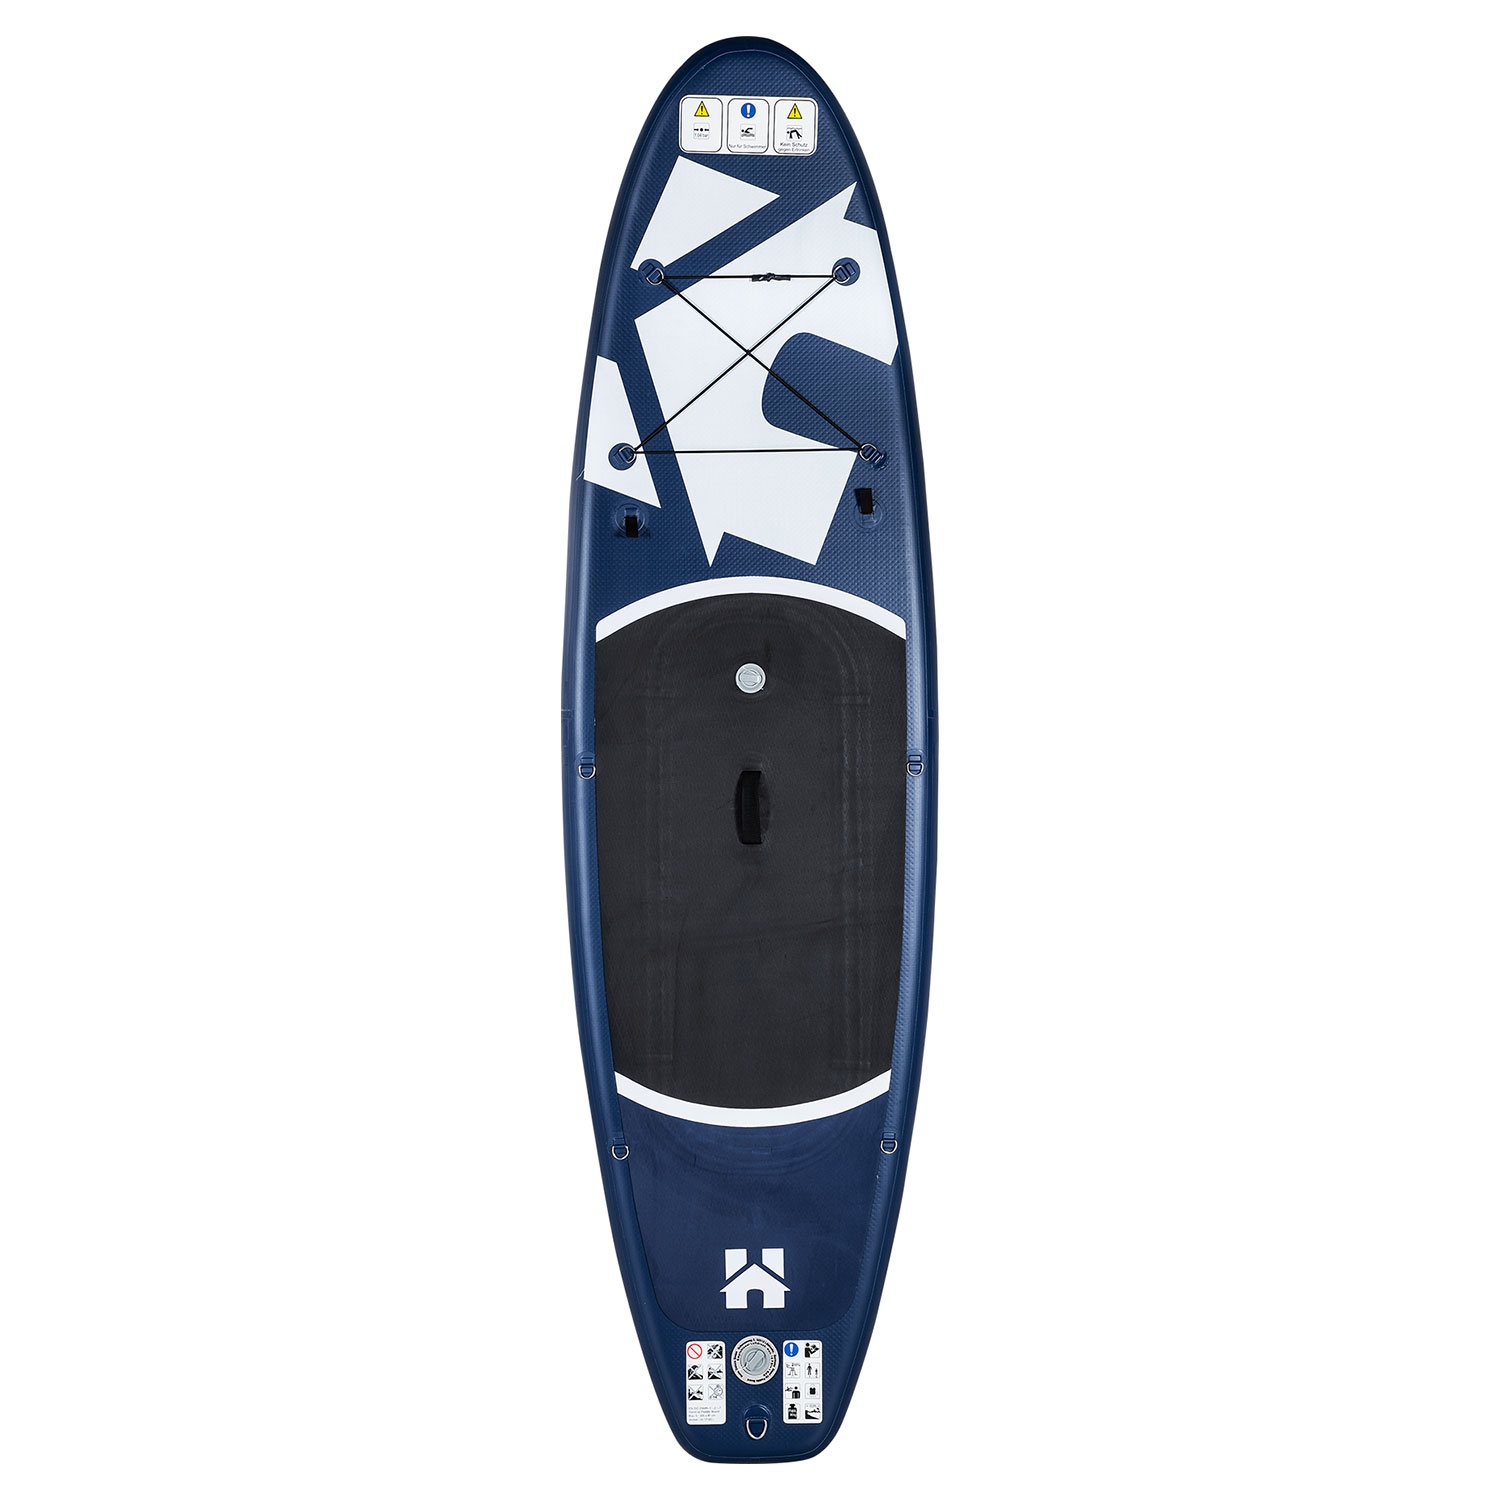 HOME DELUXE Stand-up-Paddle- Board Moana, 366 cm – Blau